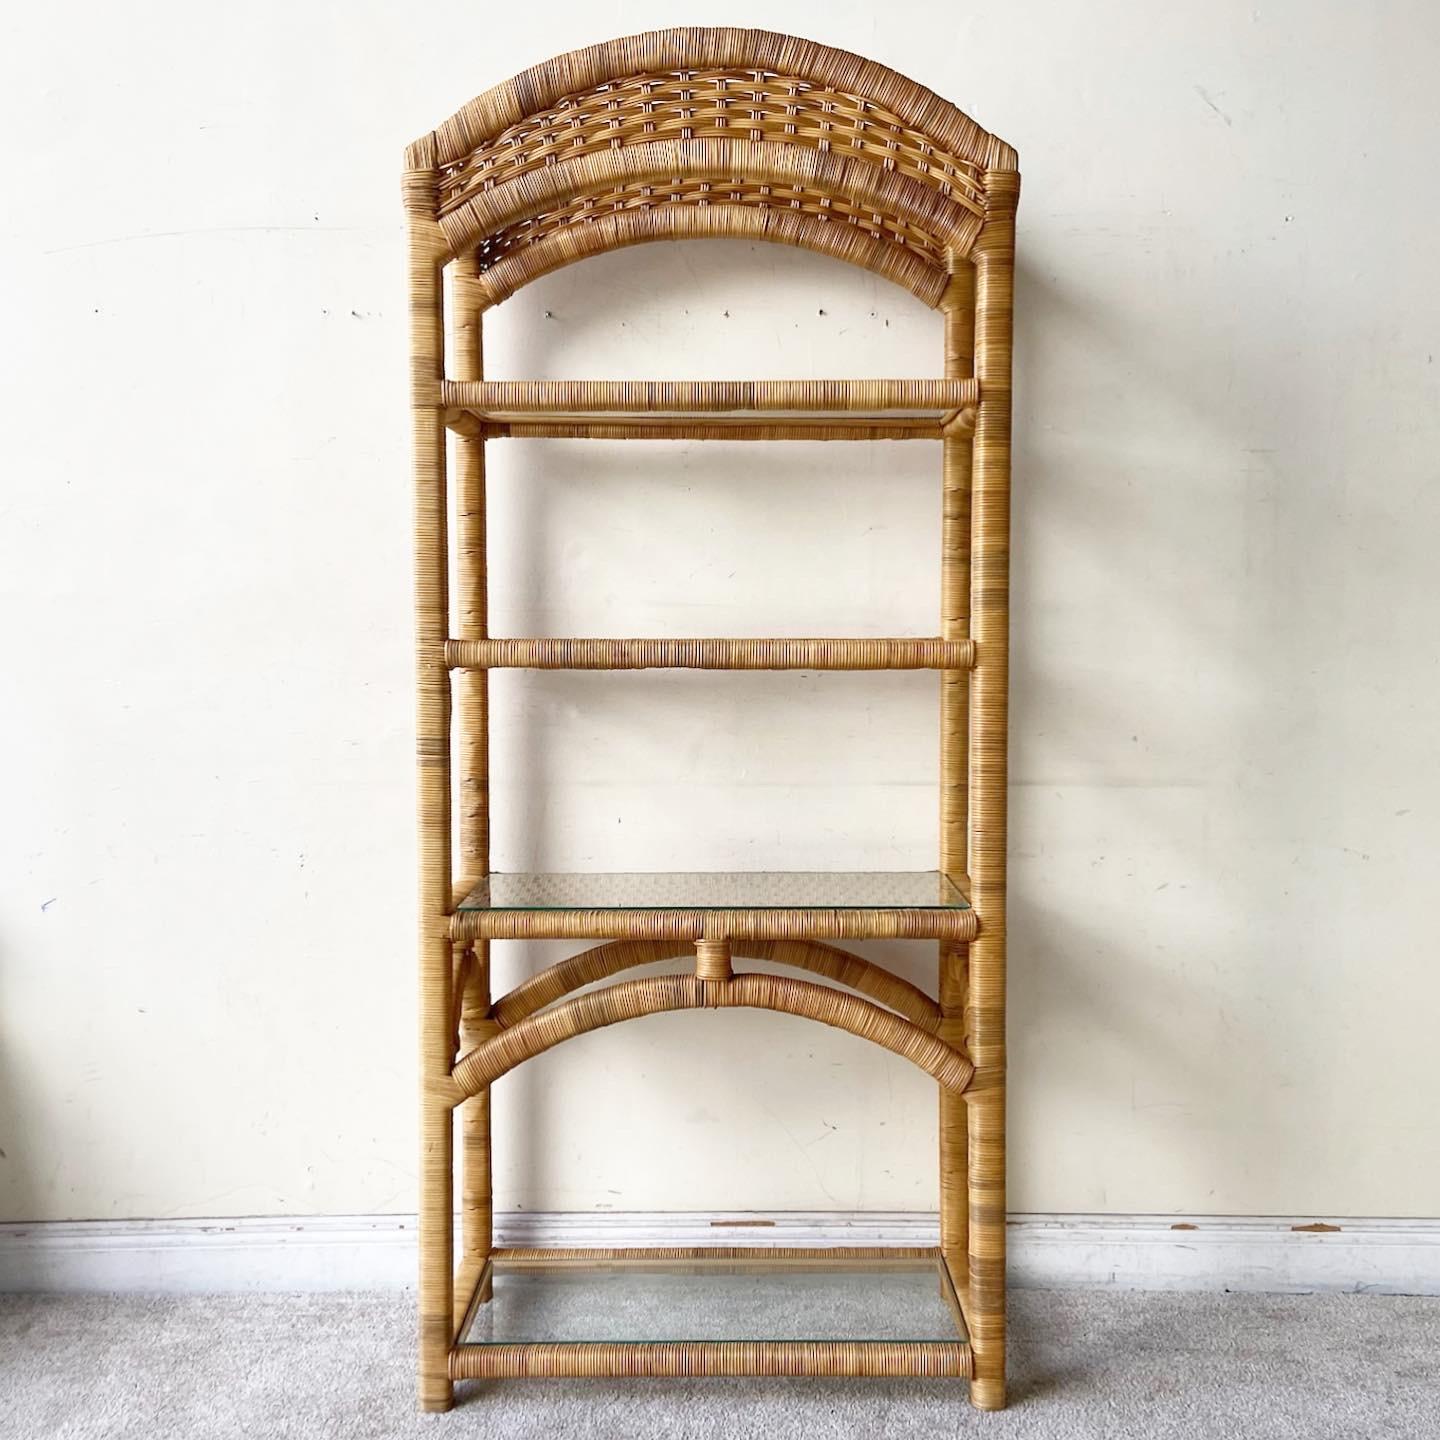 Amazing vintage bohemian Etagere with glass shelves. Features a woven rattan though the entire unit.
   